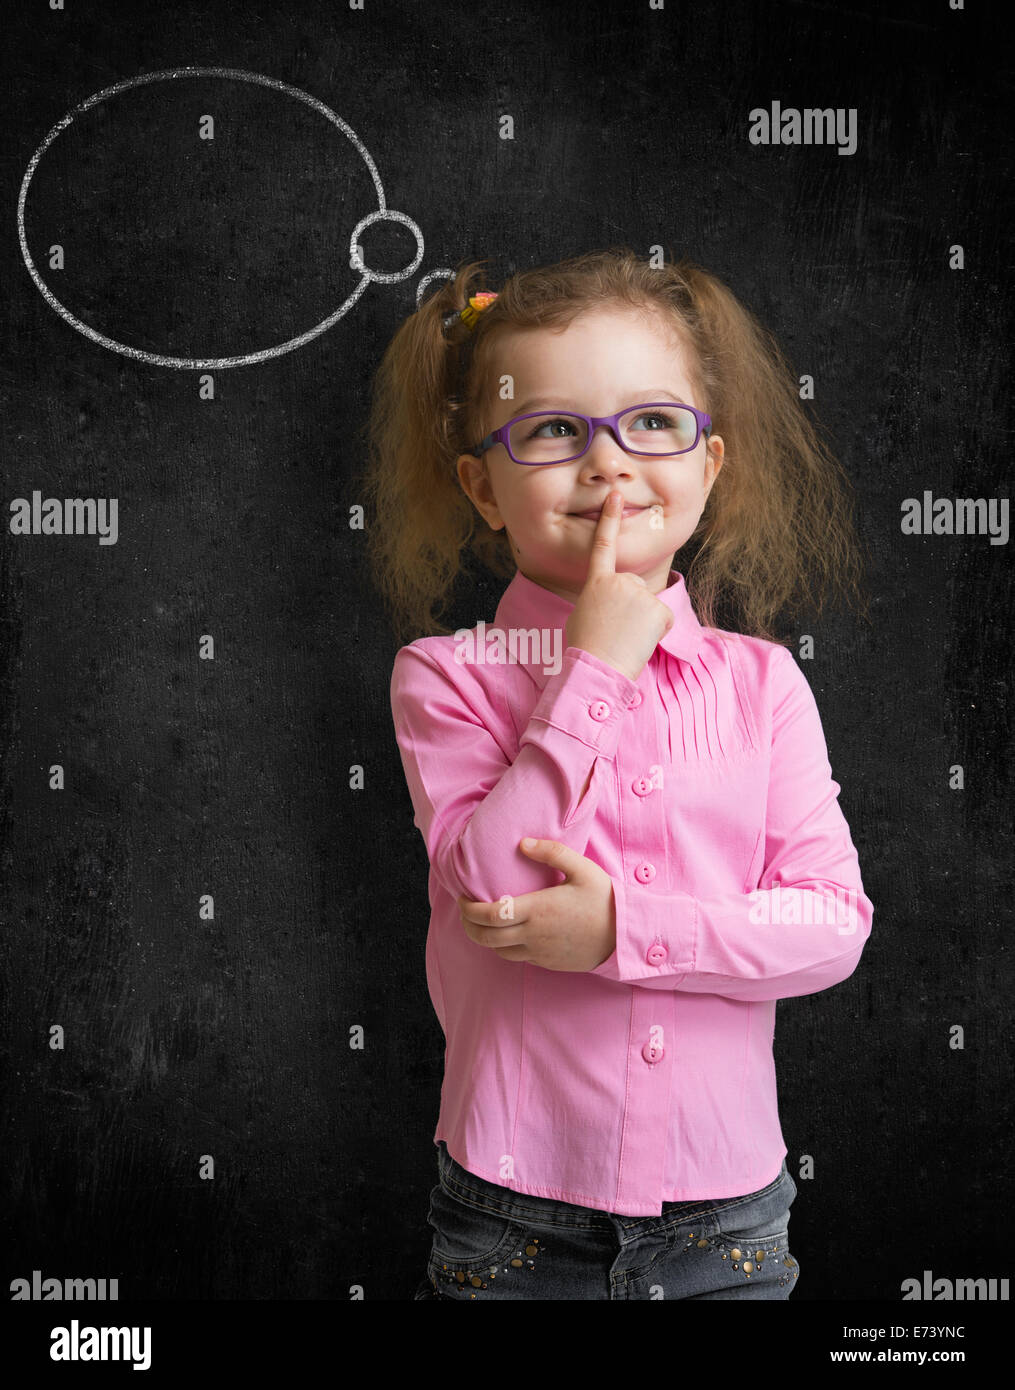 Funny child in eyeglasses standing near school chalkboard and thinking Stock Photo